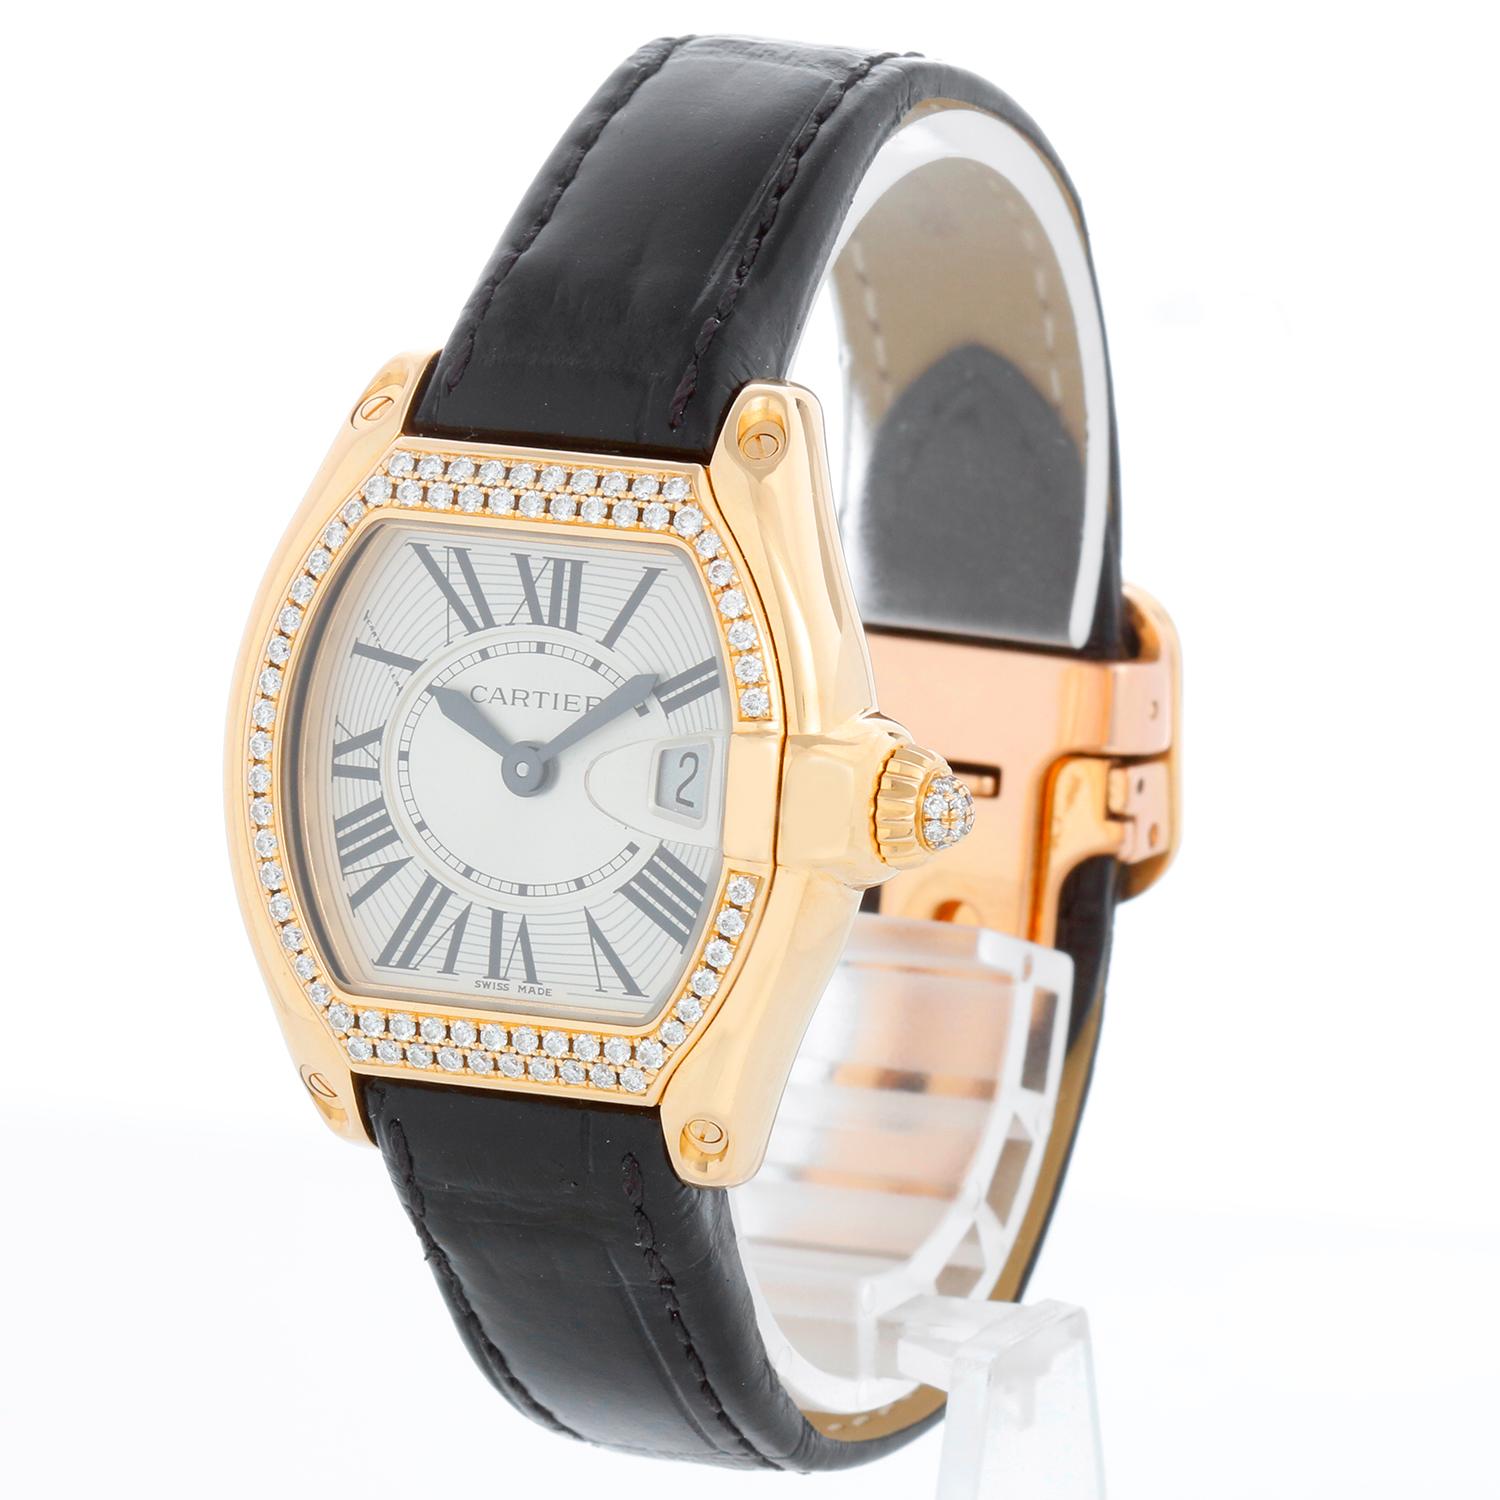 Cartier Roadster 18k Yellow Gold Quartz WE500160 2676 - Quartz. 18k yellow gold tonneau style case with diamond case  (31mm x 37mm). Silver guilloche dial with black Roman numerals; date at 3 o'clock. Black Cartier leather strap with 18K  yellow